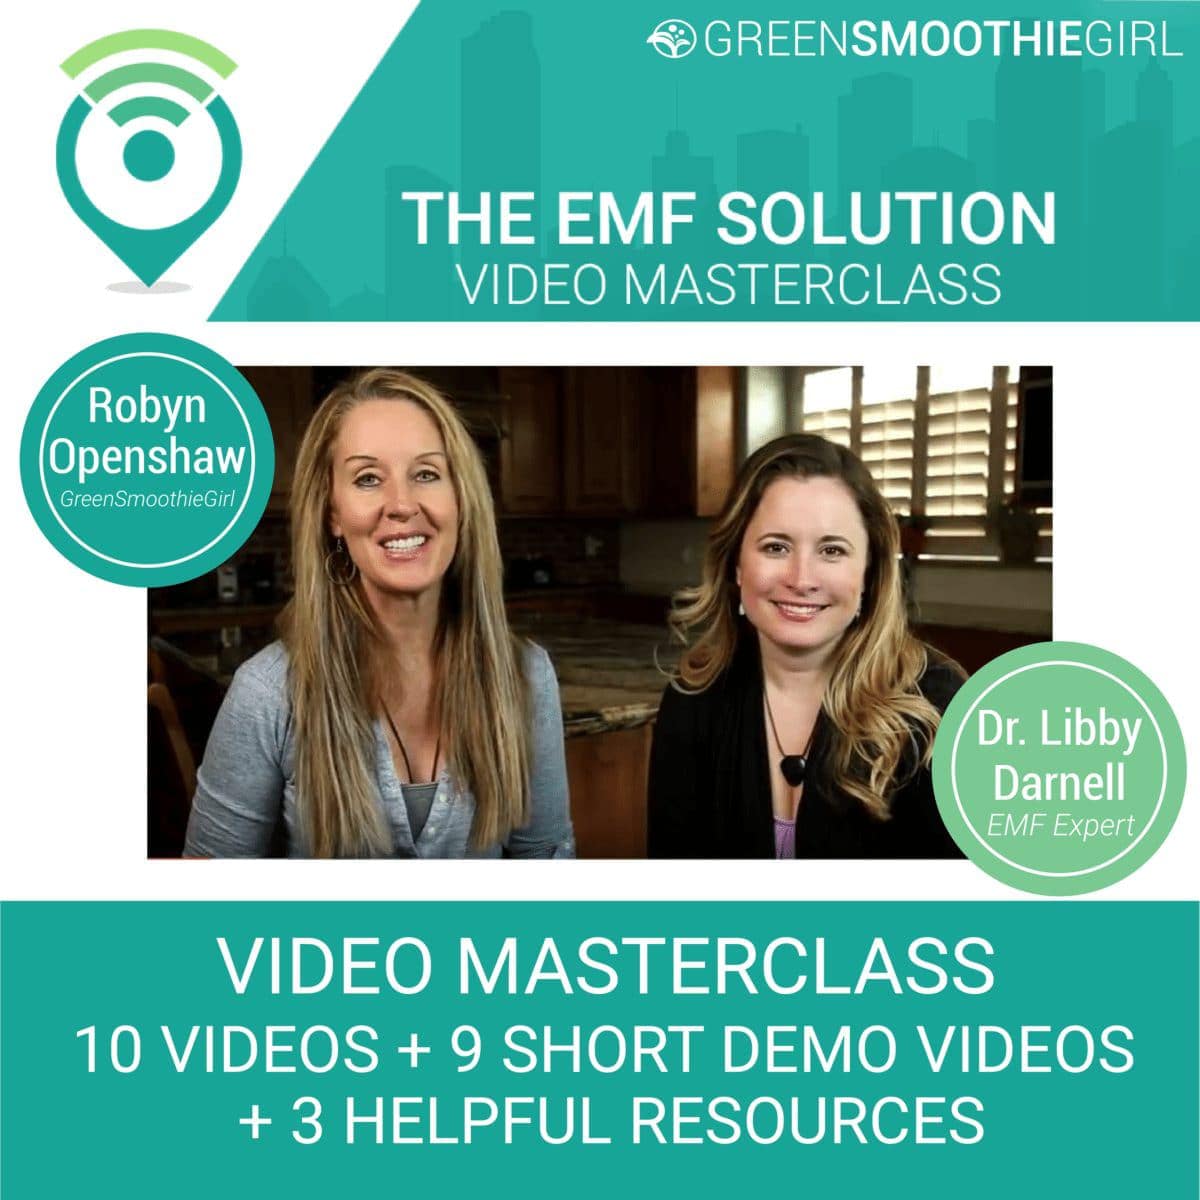 robyn-and-dr-barnell The EMF Solutions Video Masterclass. 10 videos plus 9 short demo videos and 3 helpful resources